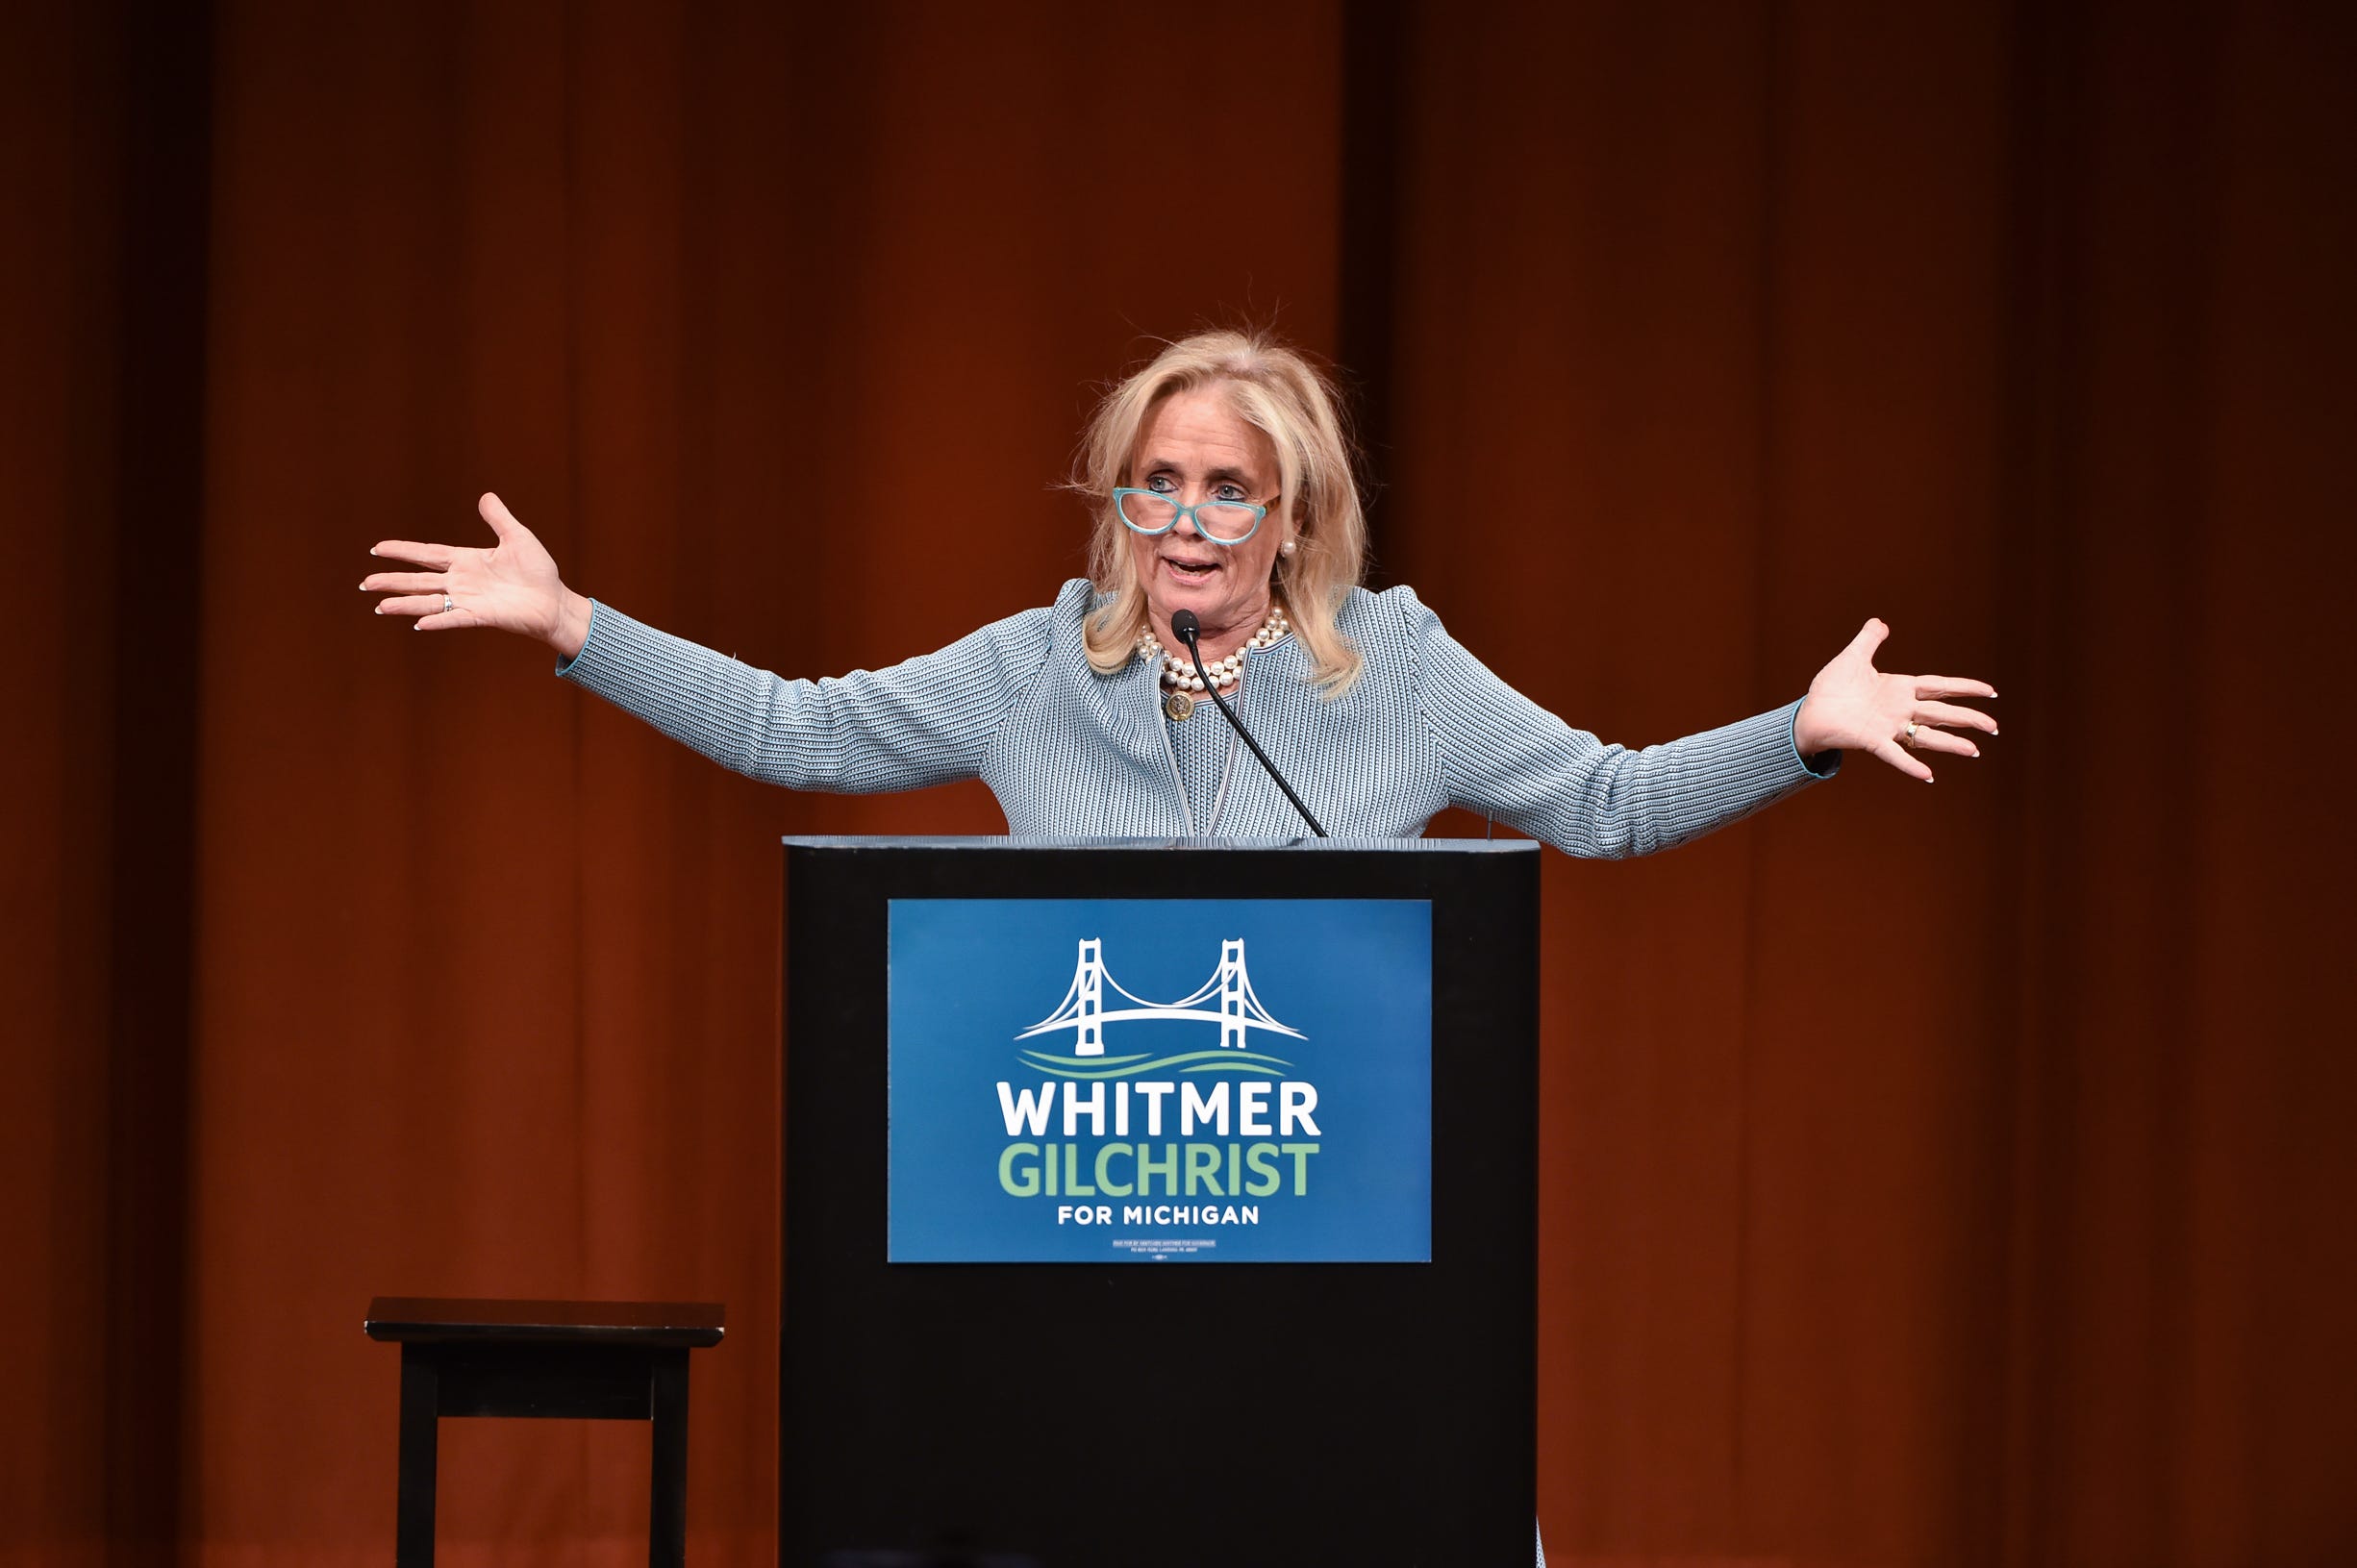 U.S. Rep. Debbie Dingell, D-Dearborn, addresses a campaign rally for Michigan Democrats at Rackham Auditorium Friday on the campus of the University of Michigan in Ann Arbor.